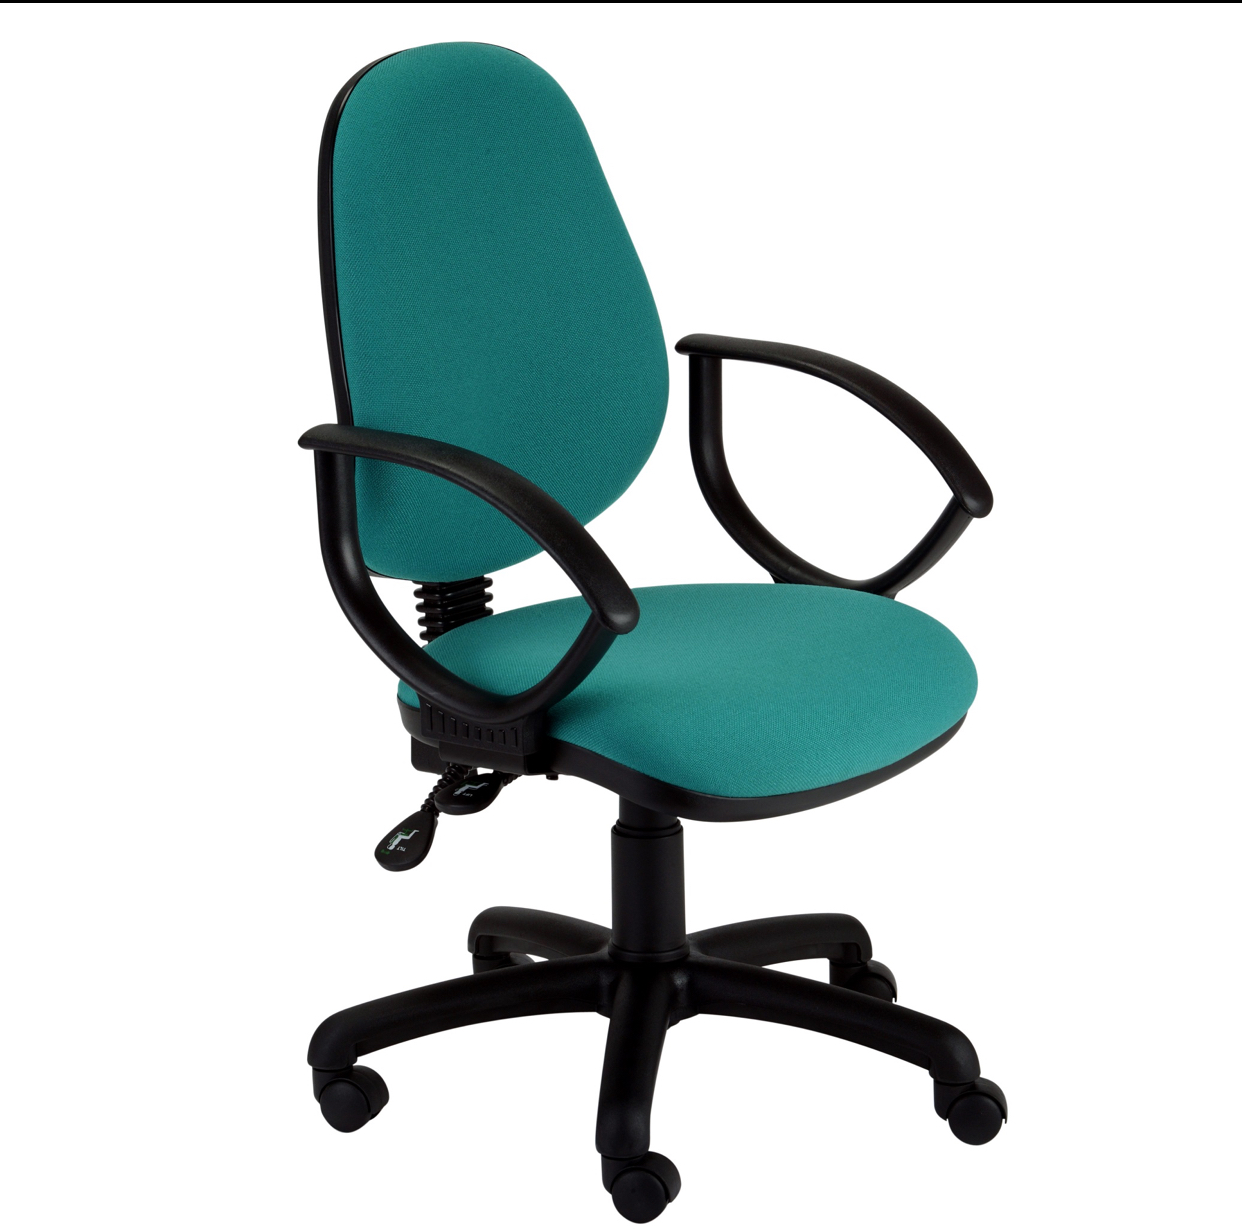 AntiMicrobial Office Chair. Available in all Camira Vita textured vinyl that has been certified. Fixed , adjustable or folding arms available 